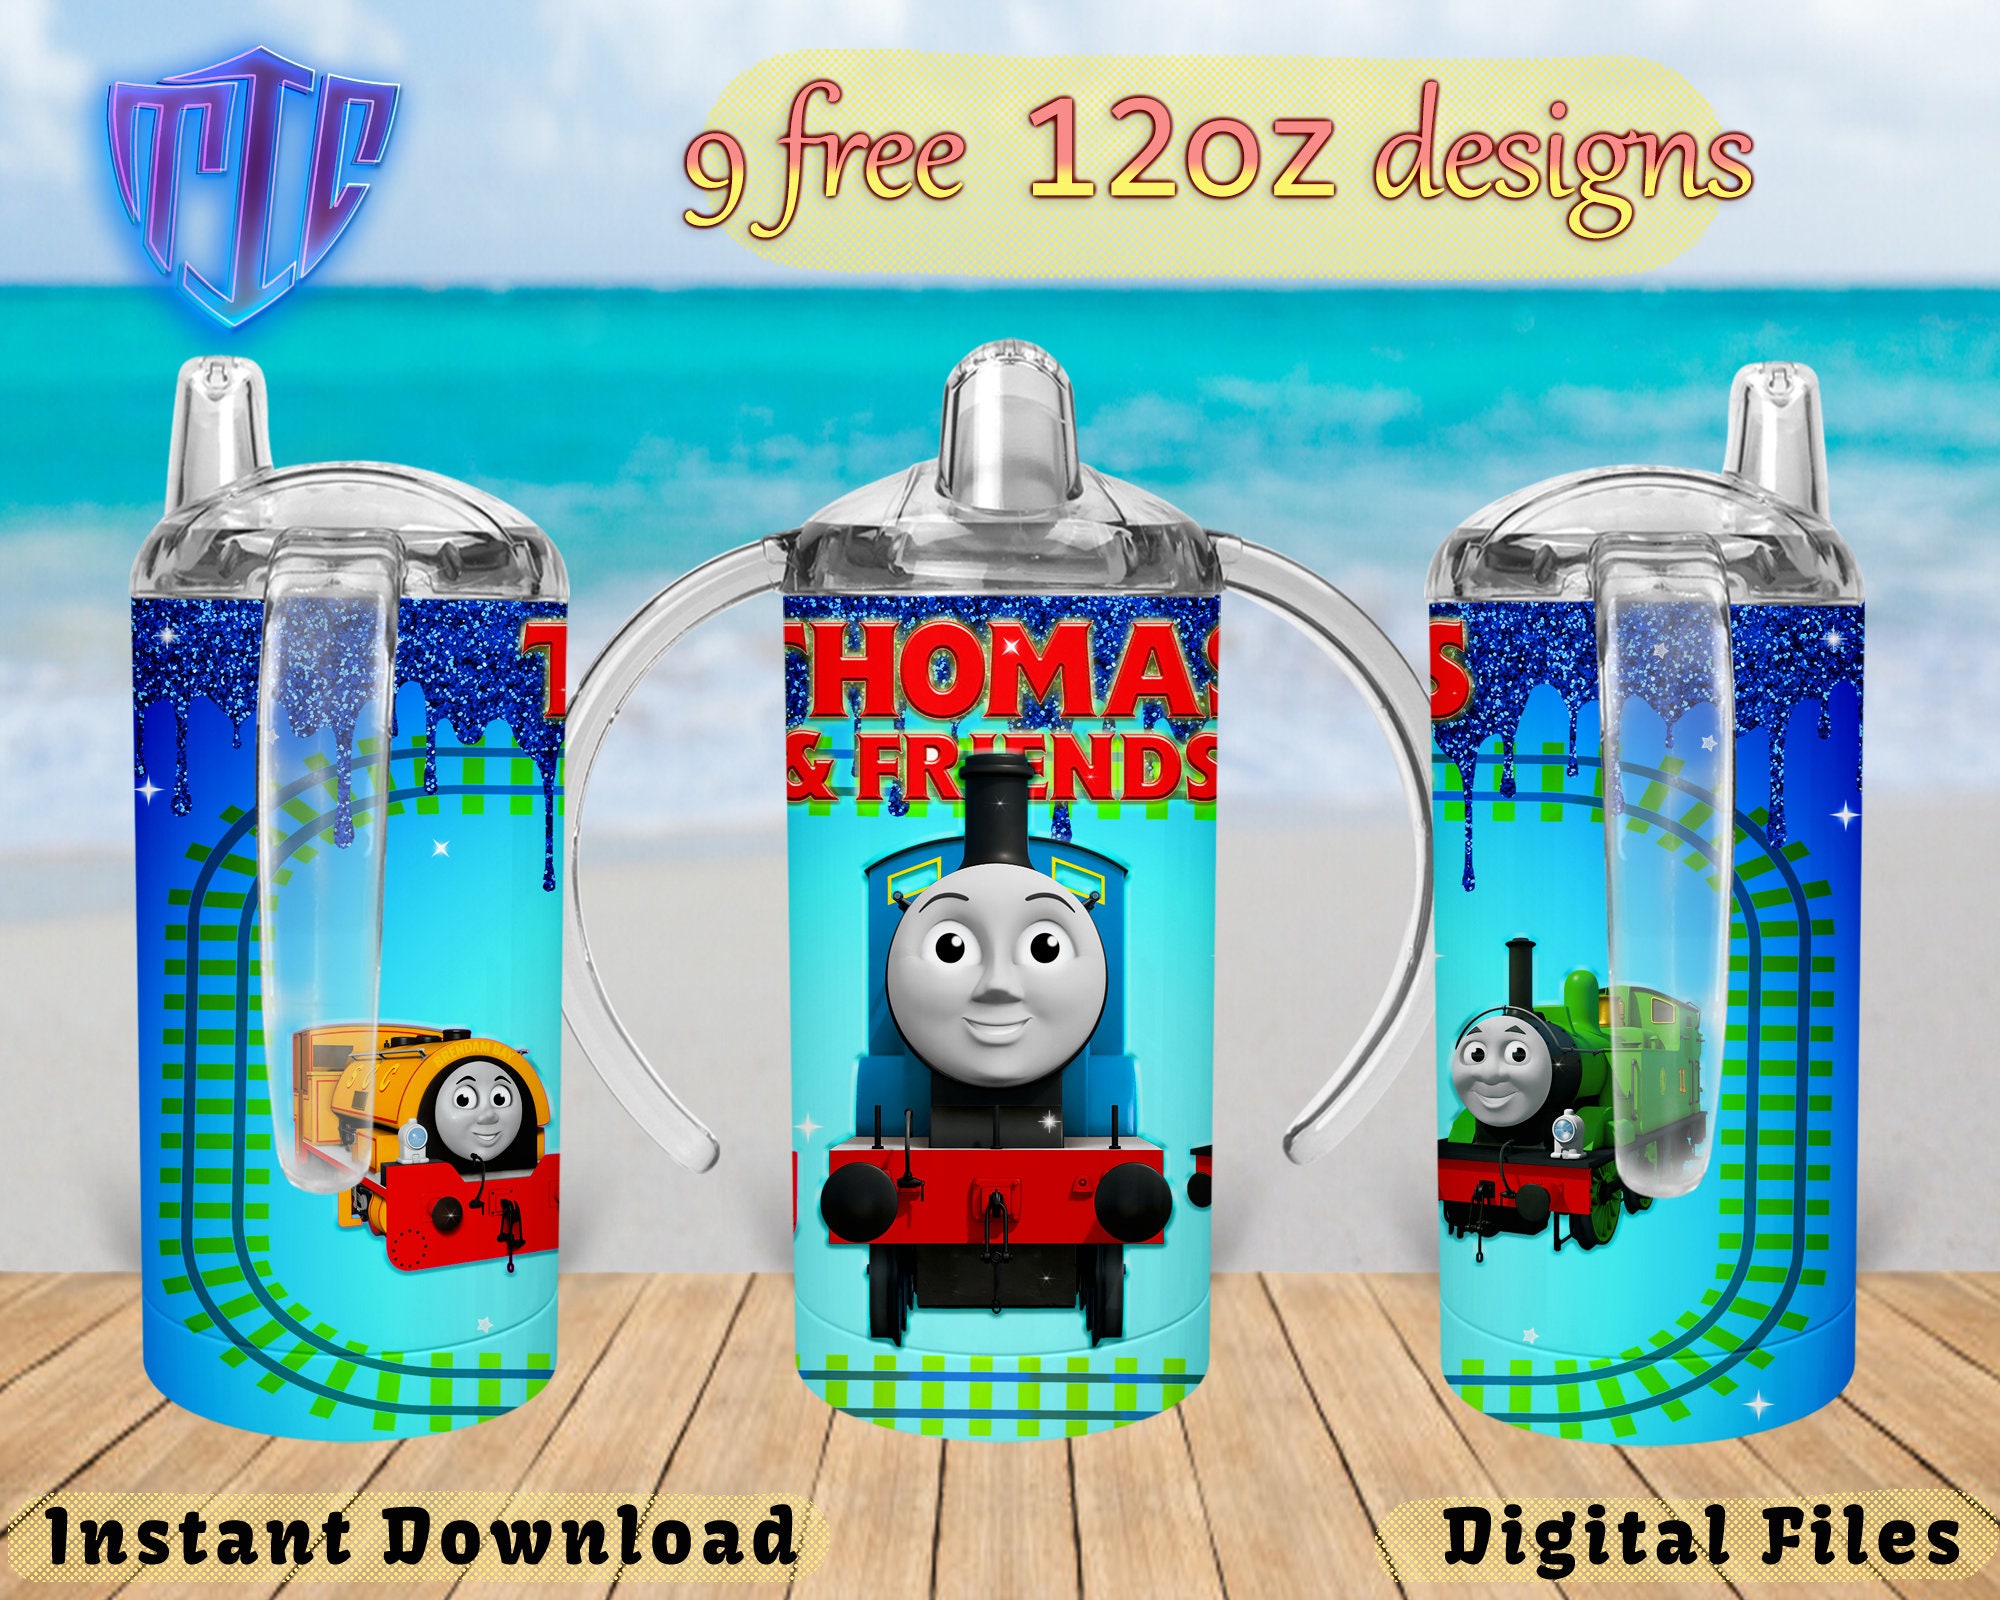 personalized train water bottle • christmas gift • school lunch water  bottle • choo choo train birthday gift